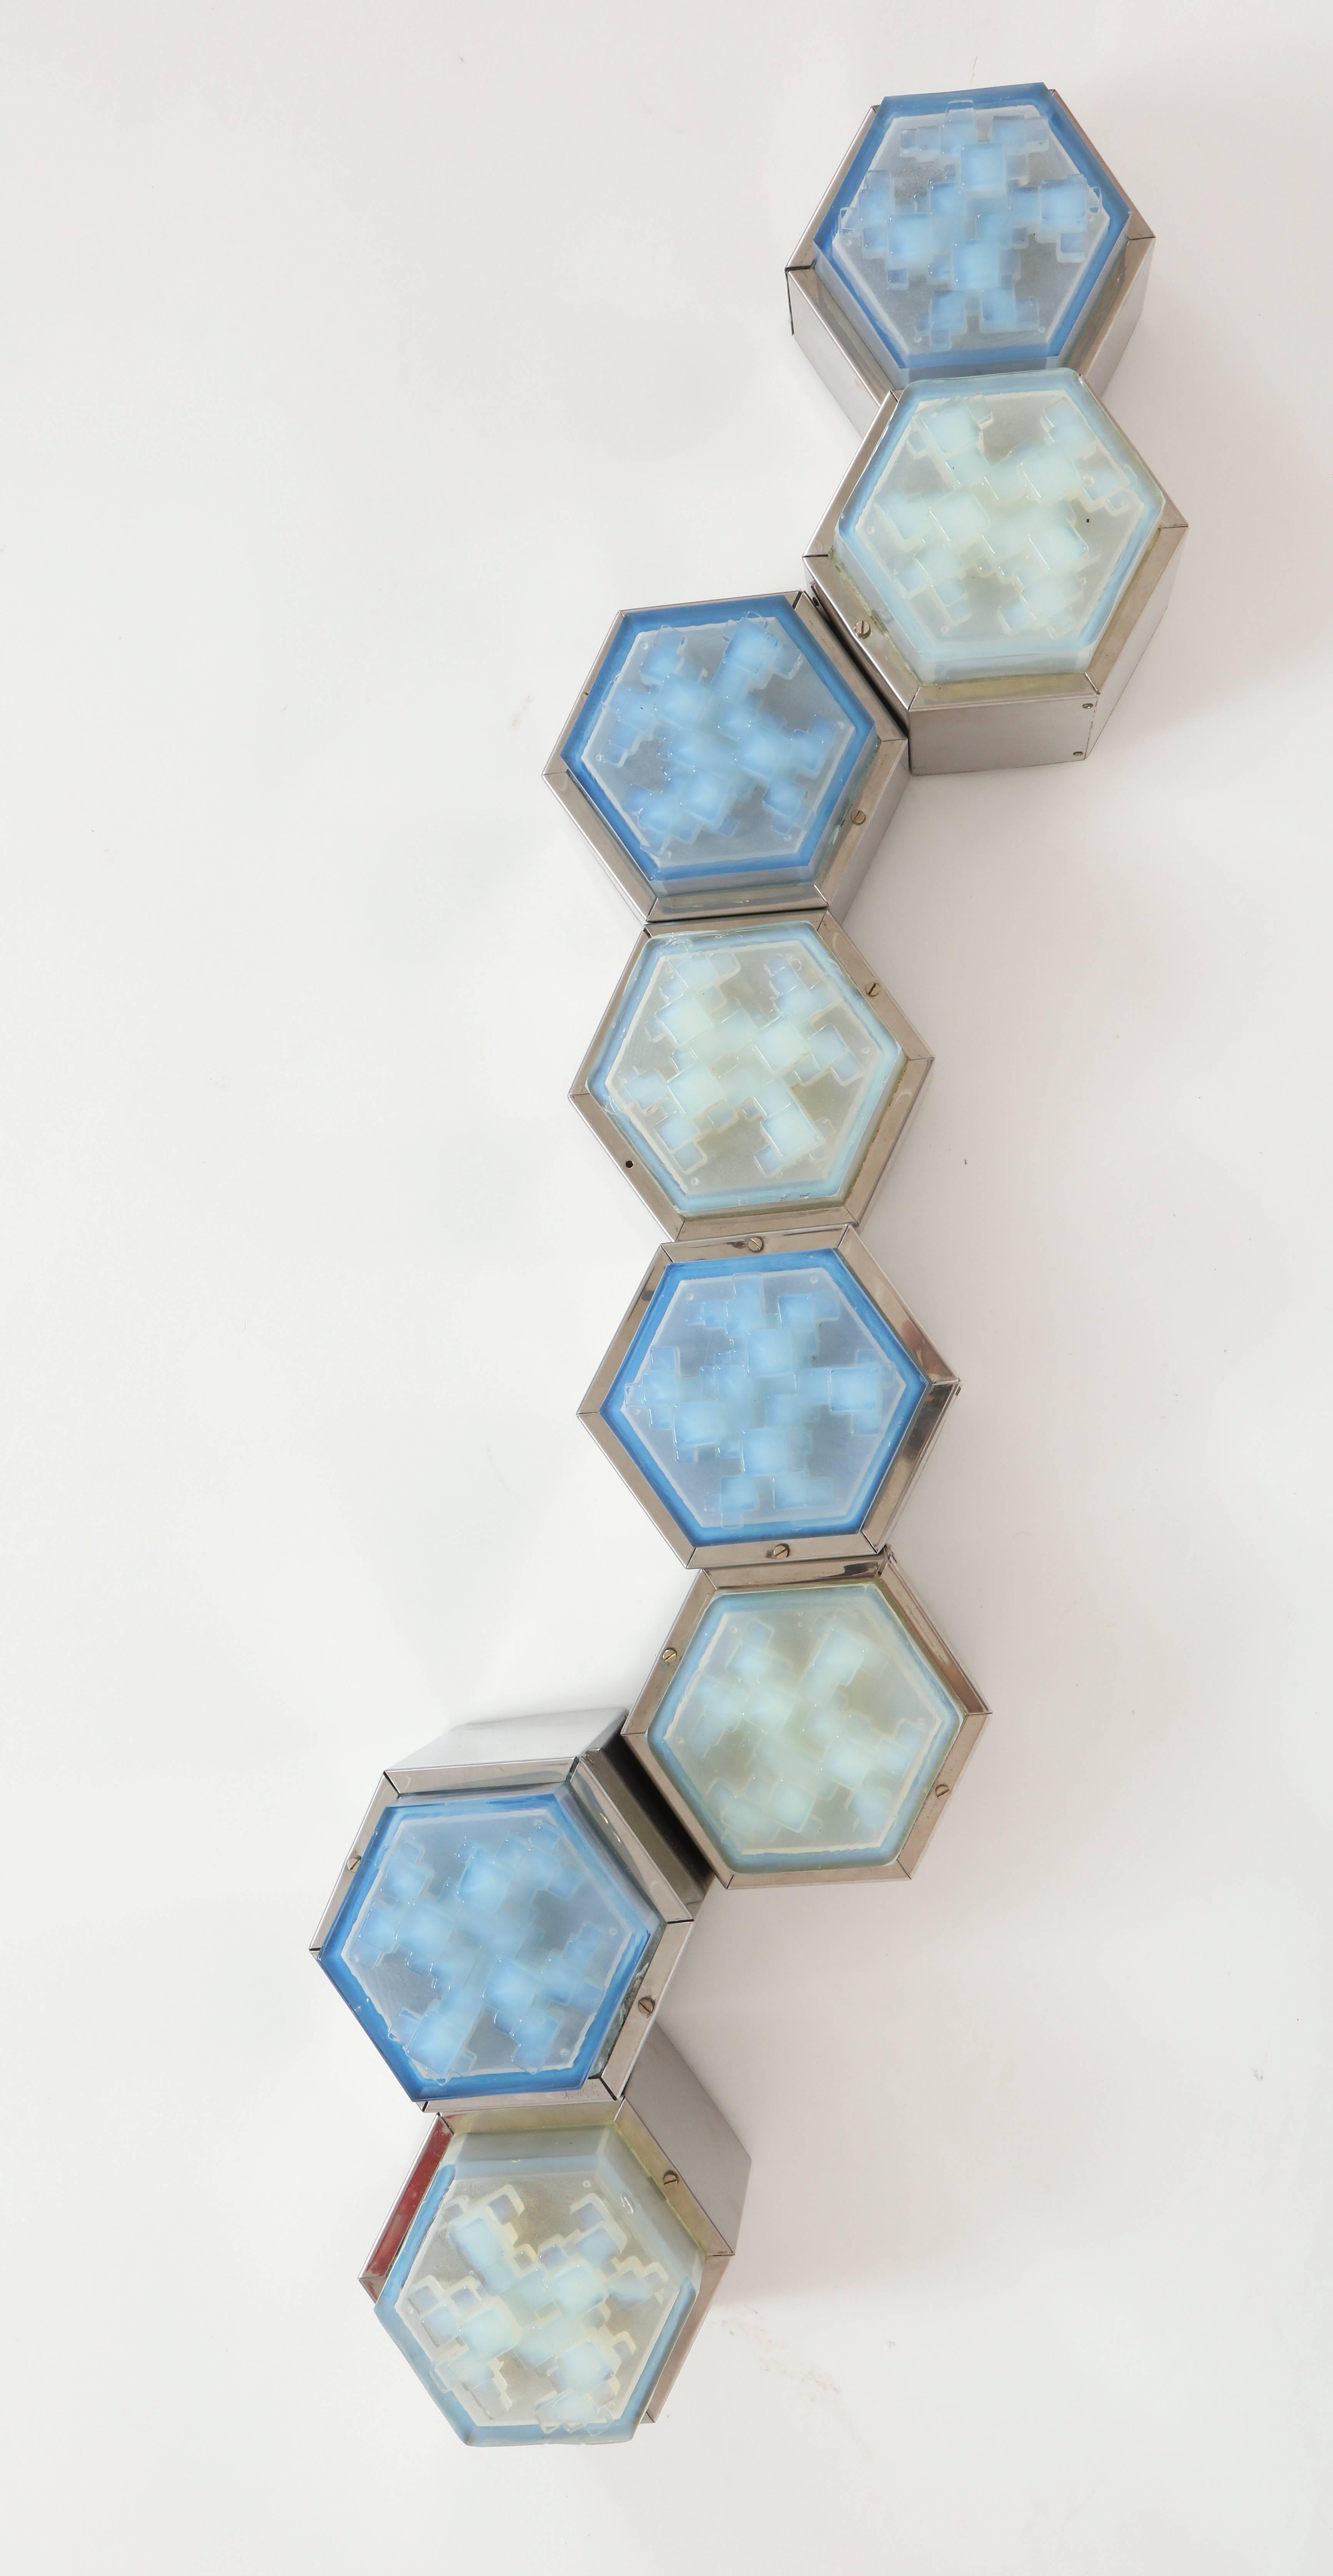 Hexagonal Wall Light in Blue Chrome and Glass, style of Poliarte, 1960,1970 Italian

Lovely chrome and light blue wall sconce.
Eight pieces attached together.

3.5 inches Deep
12 inches Height
42 inches Wide